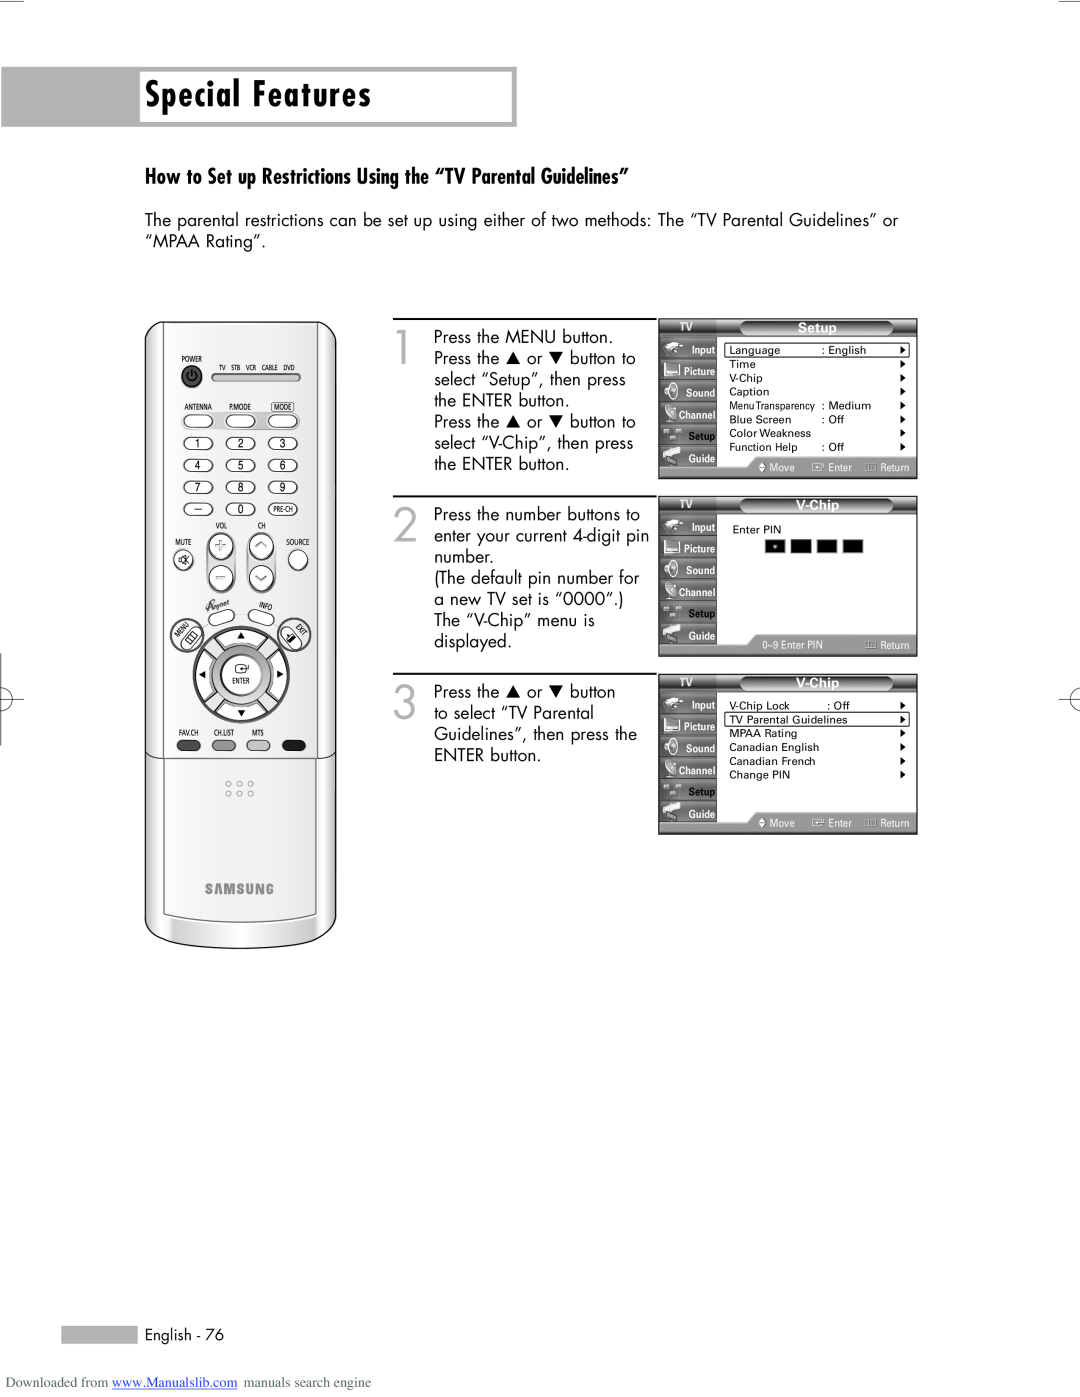 Samsung HL-R5656W, HL-R6156W, HL-R5056W How to Set up Restrictions Using the “TV Parental Guidelines”, Special Features 